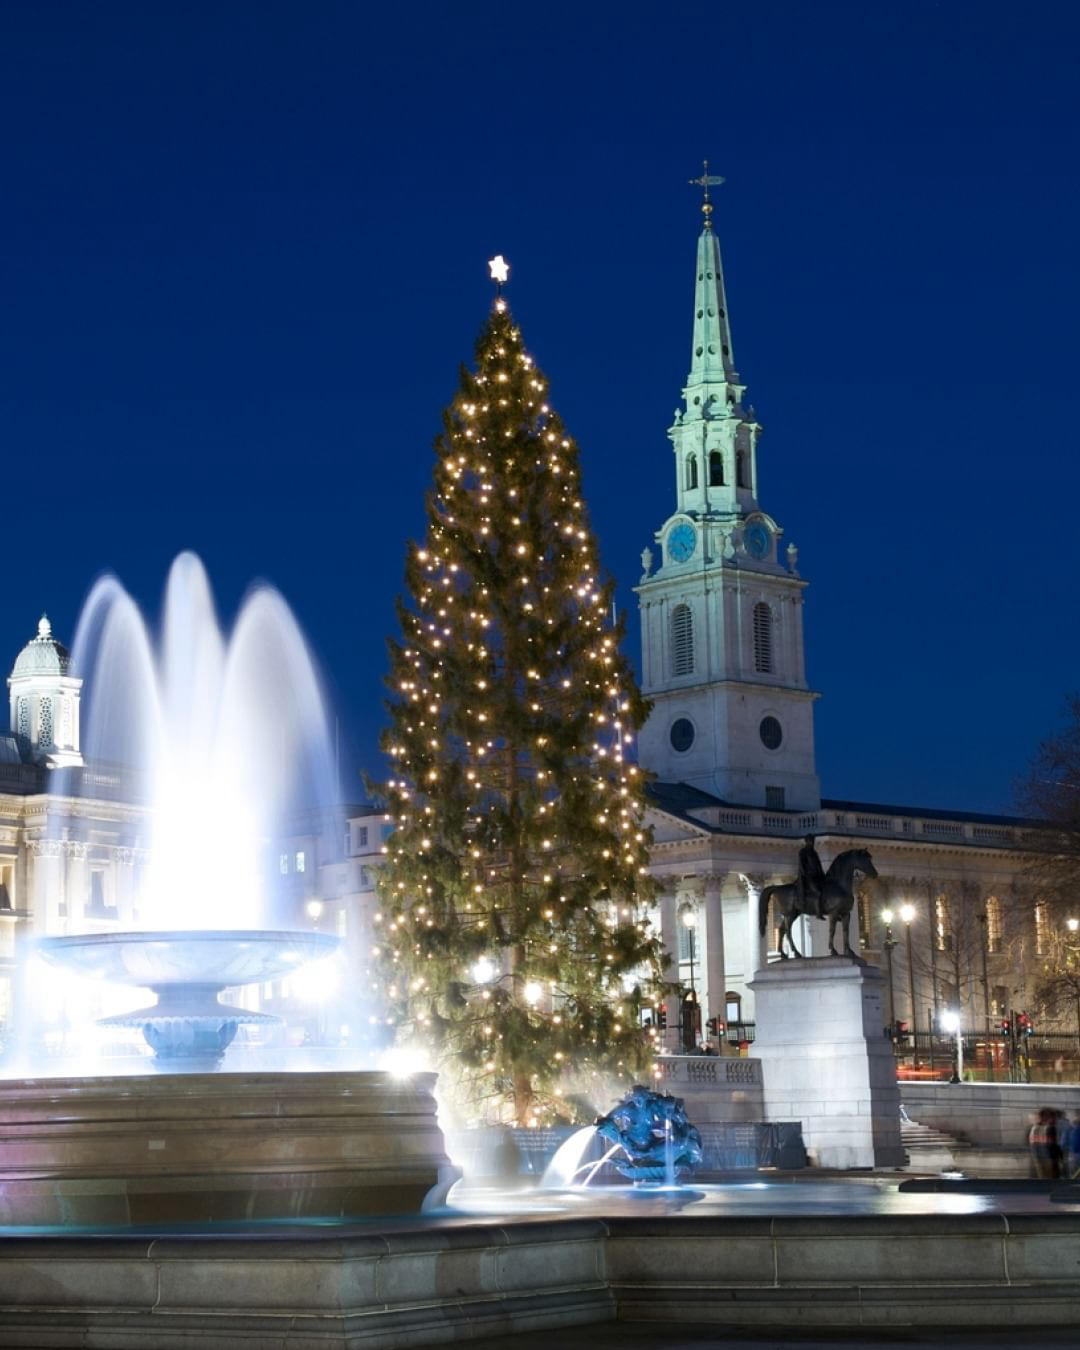 All through December you can see the Norwegian Christmas tree at Trafalgar Square in London